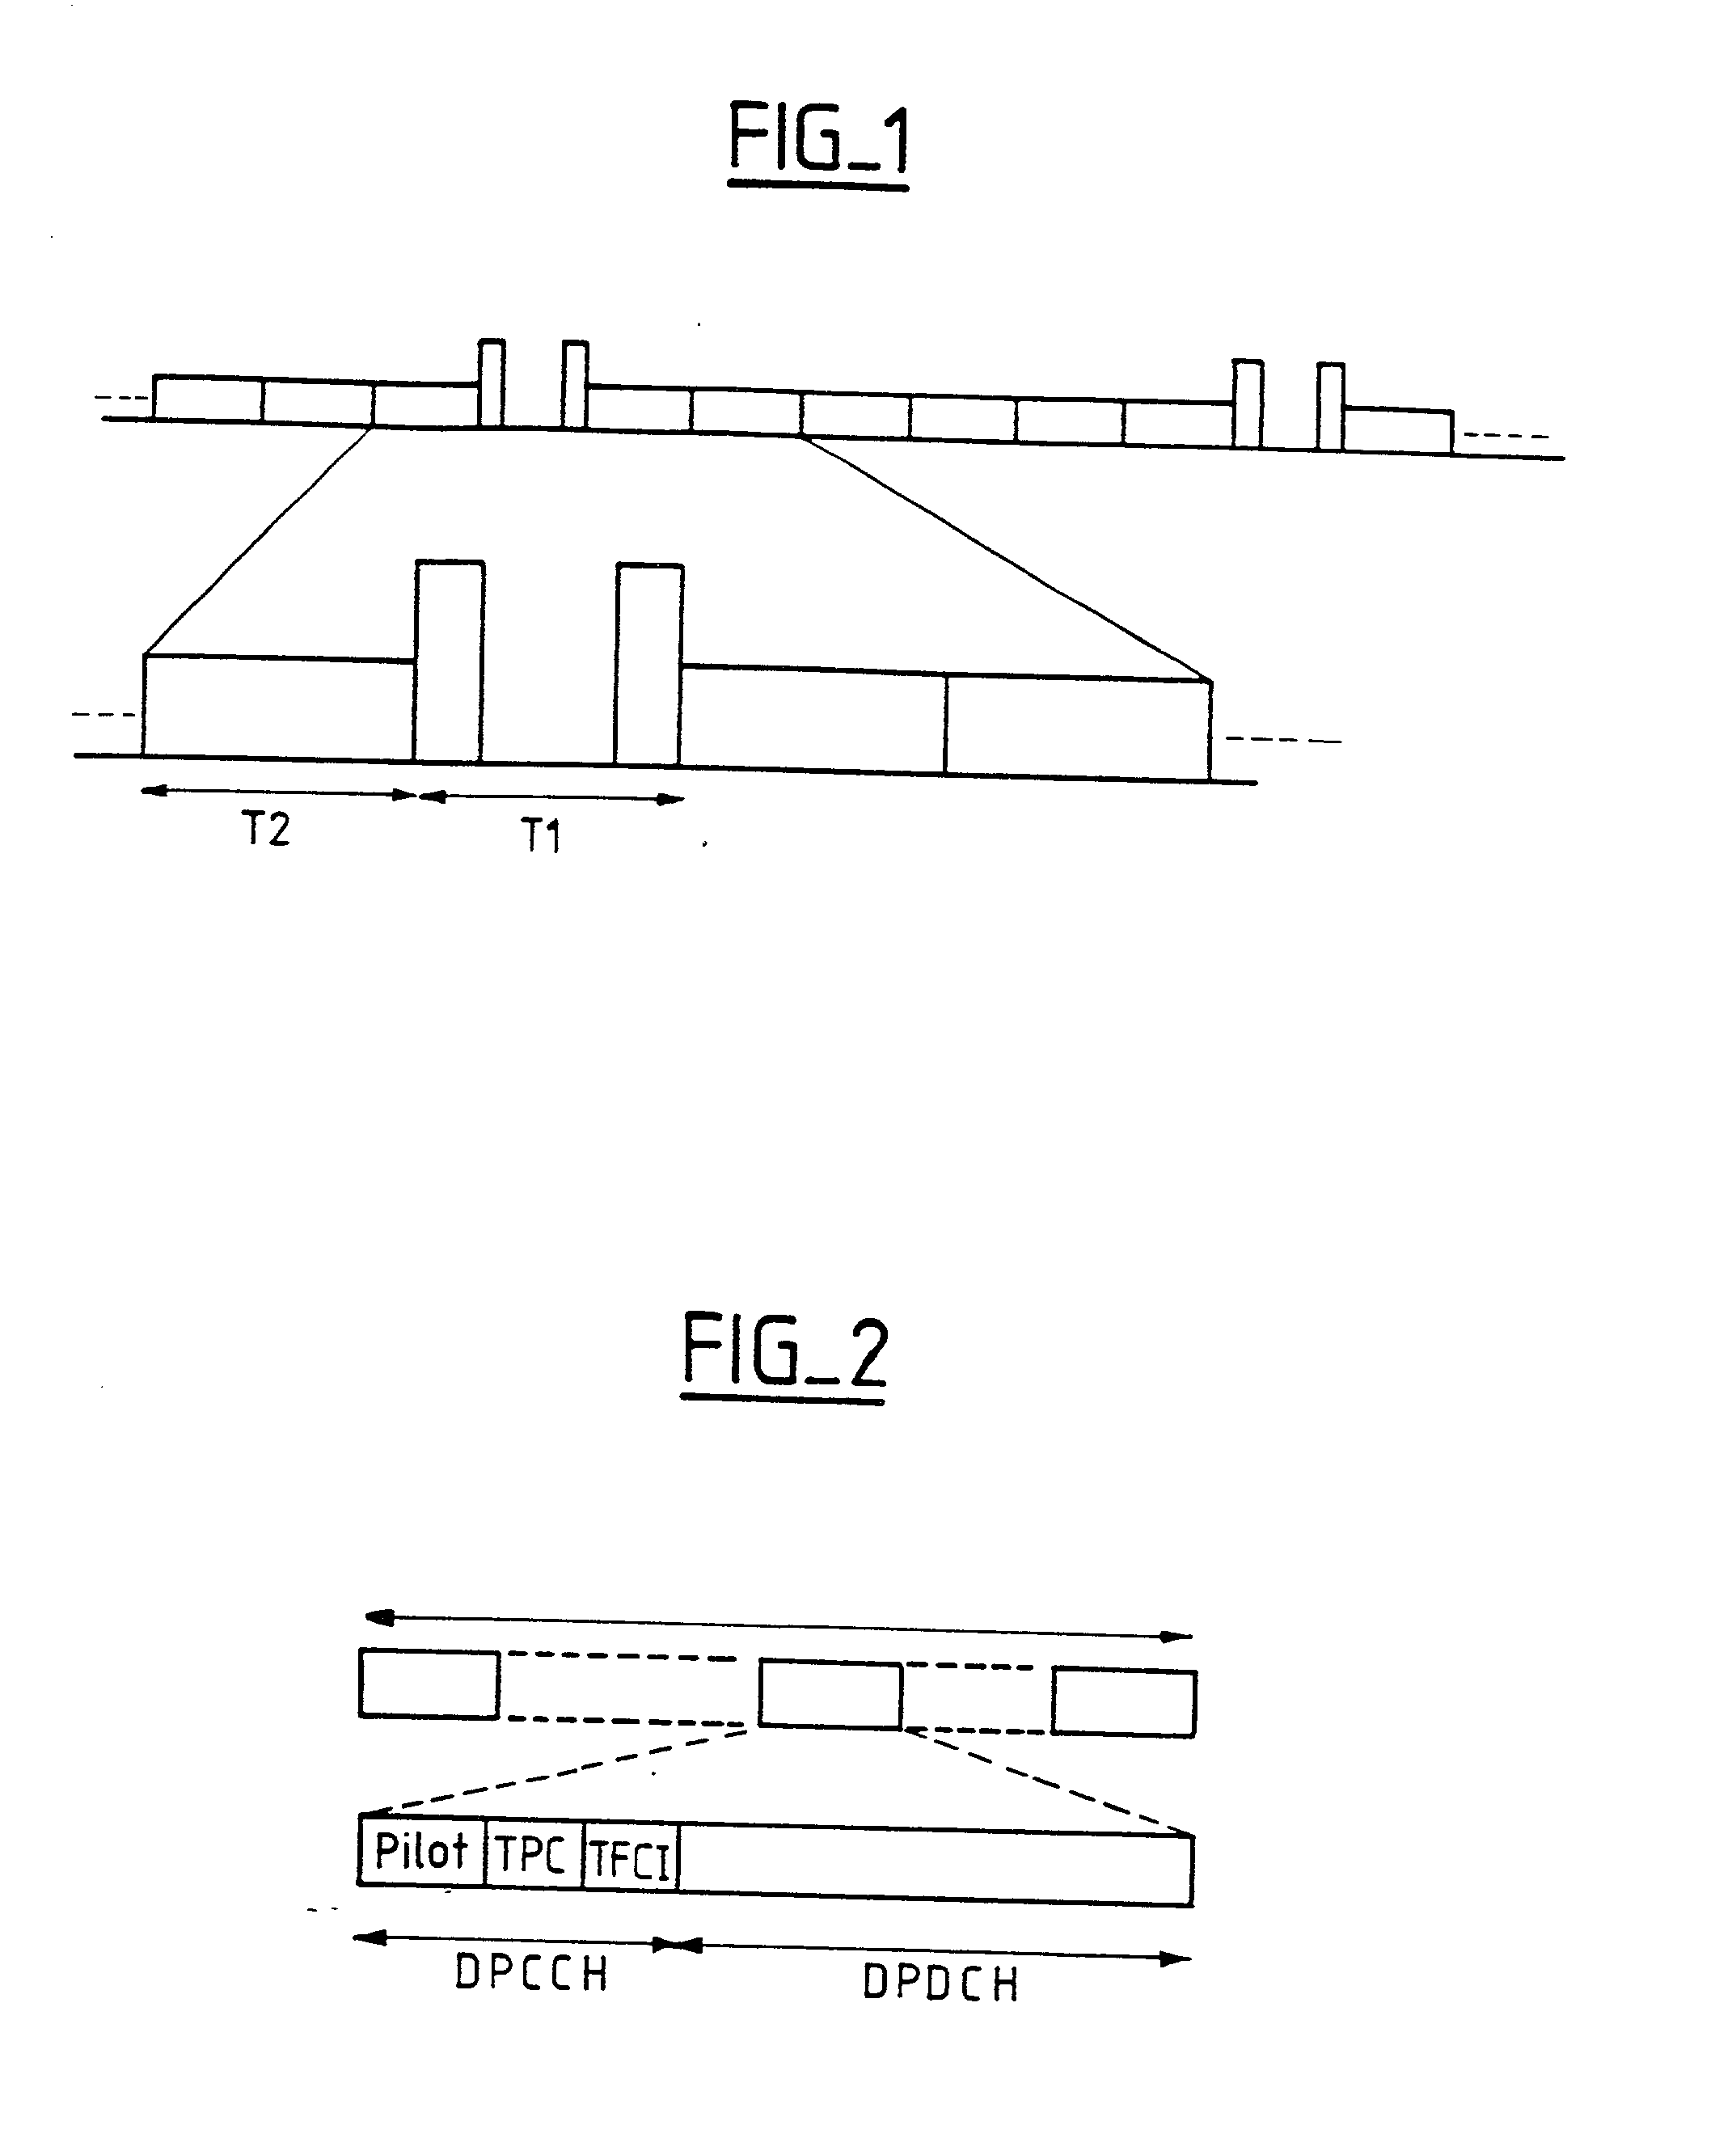 Method of controlling transmission power in a mobile radio system